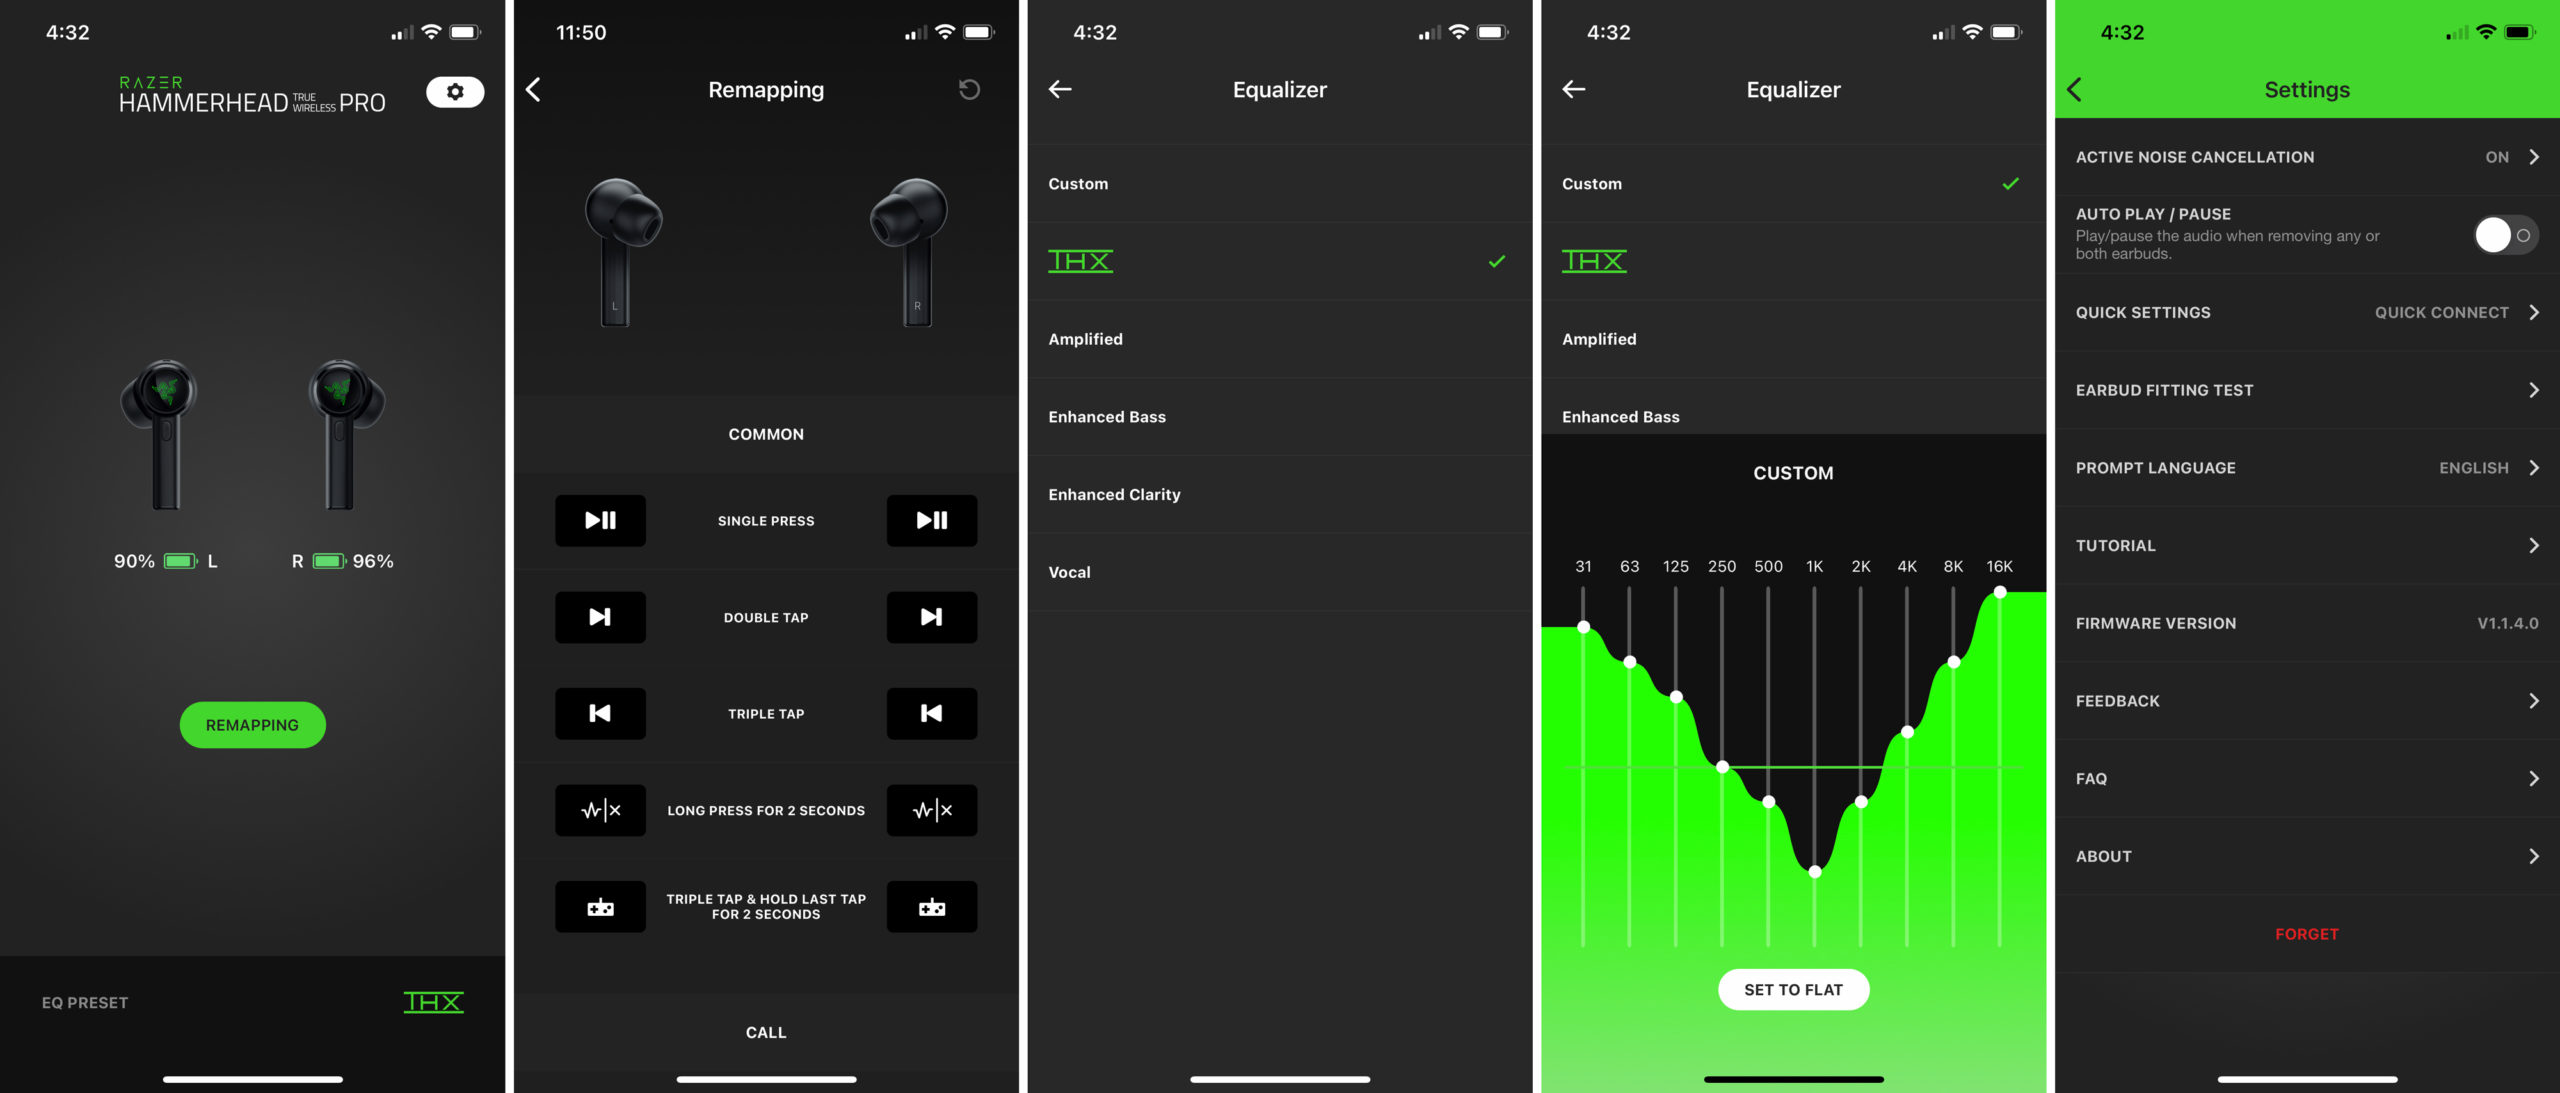 The Hammerhead True Wireless Pro's accompanying iOS/Android app is very good allowing tap shortcuts to be remapped and even custom EQ presets to be created. (Screenshot: Andrew Liszewski / Gizmodo)